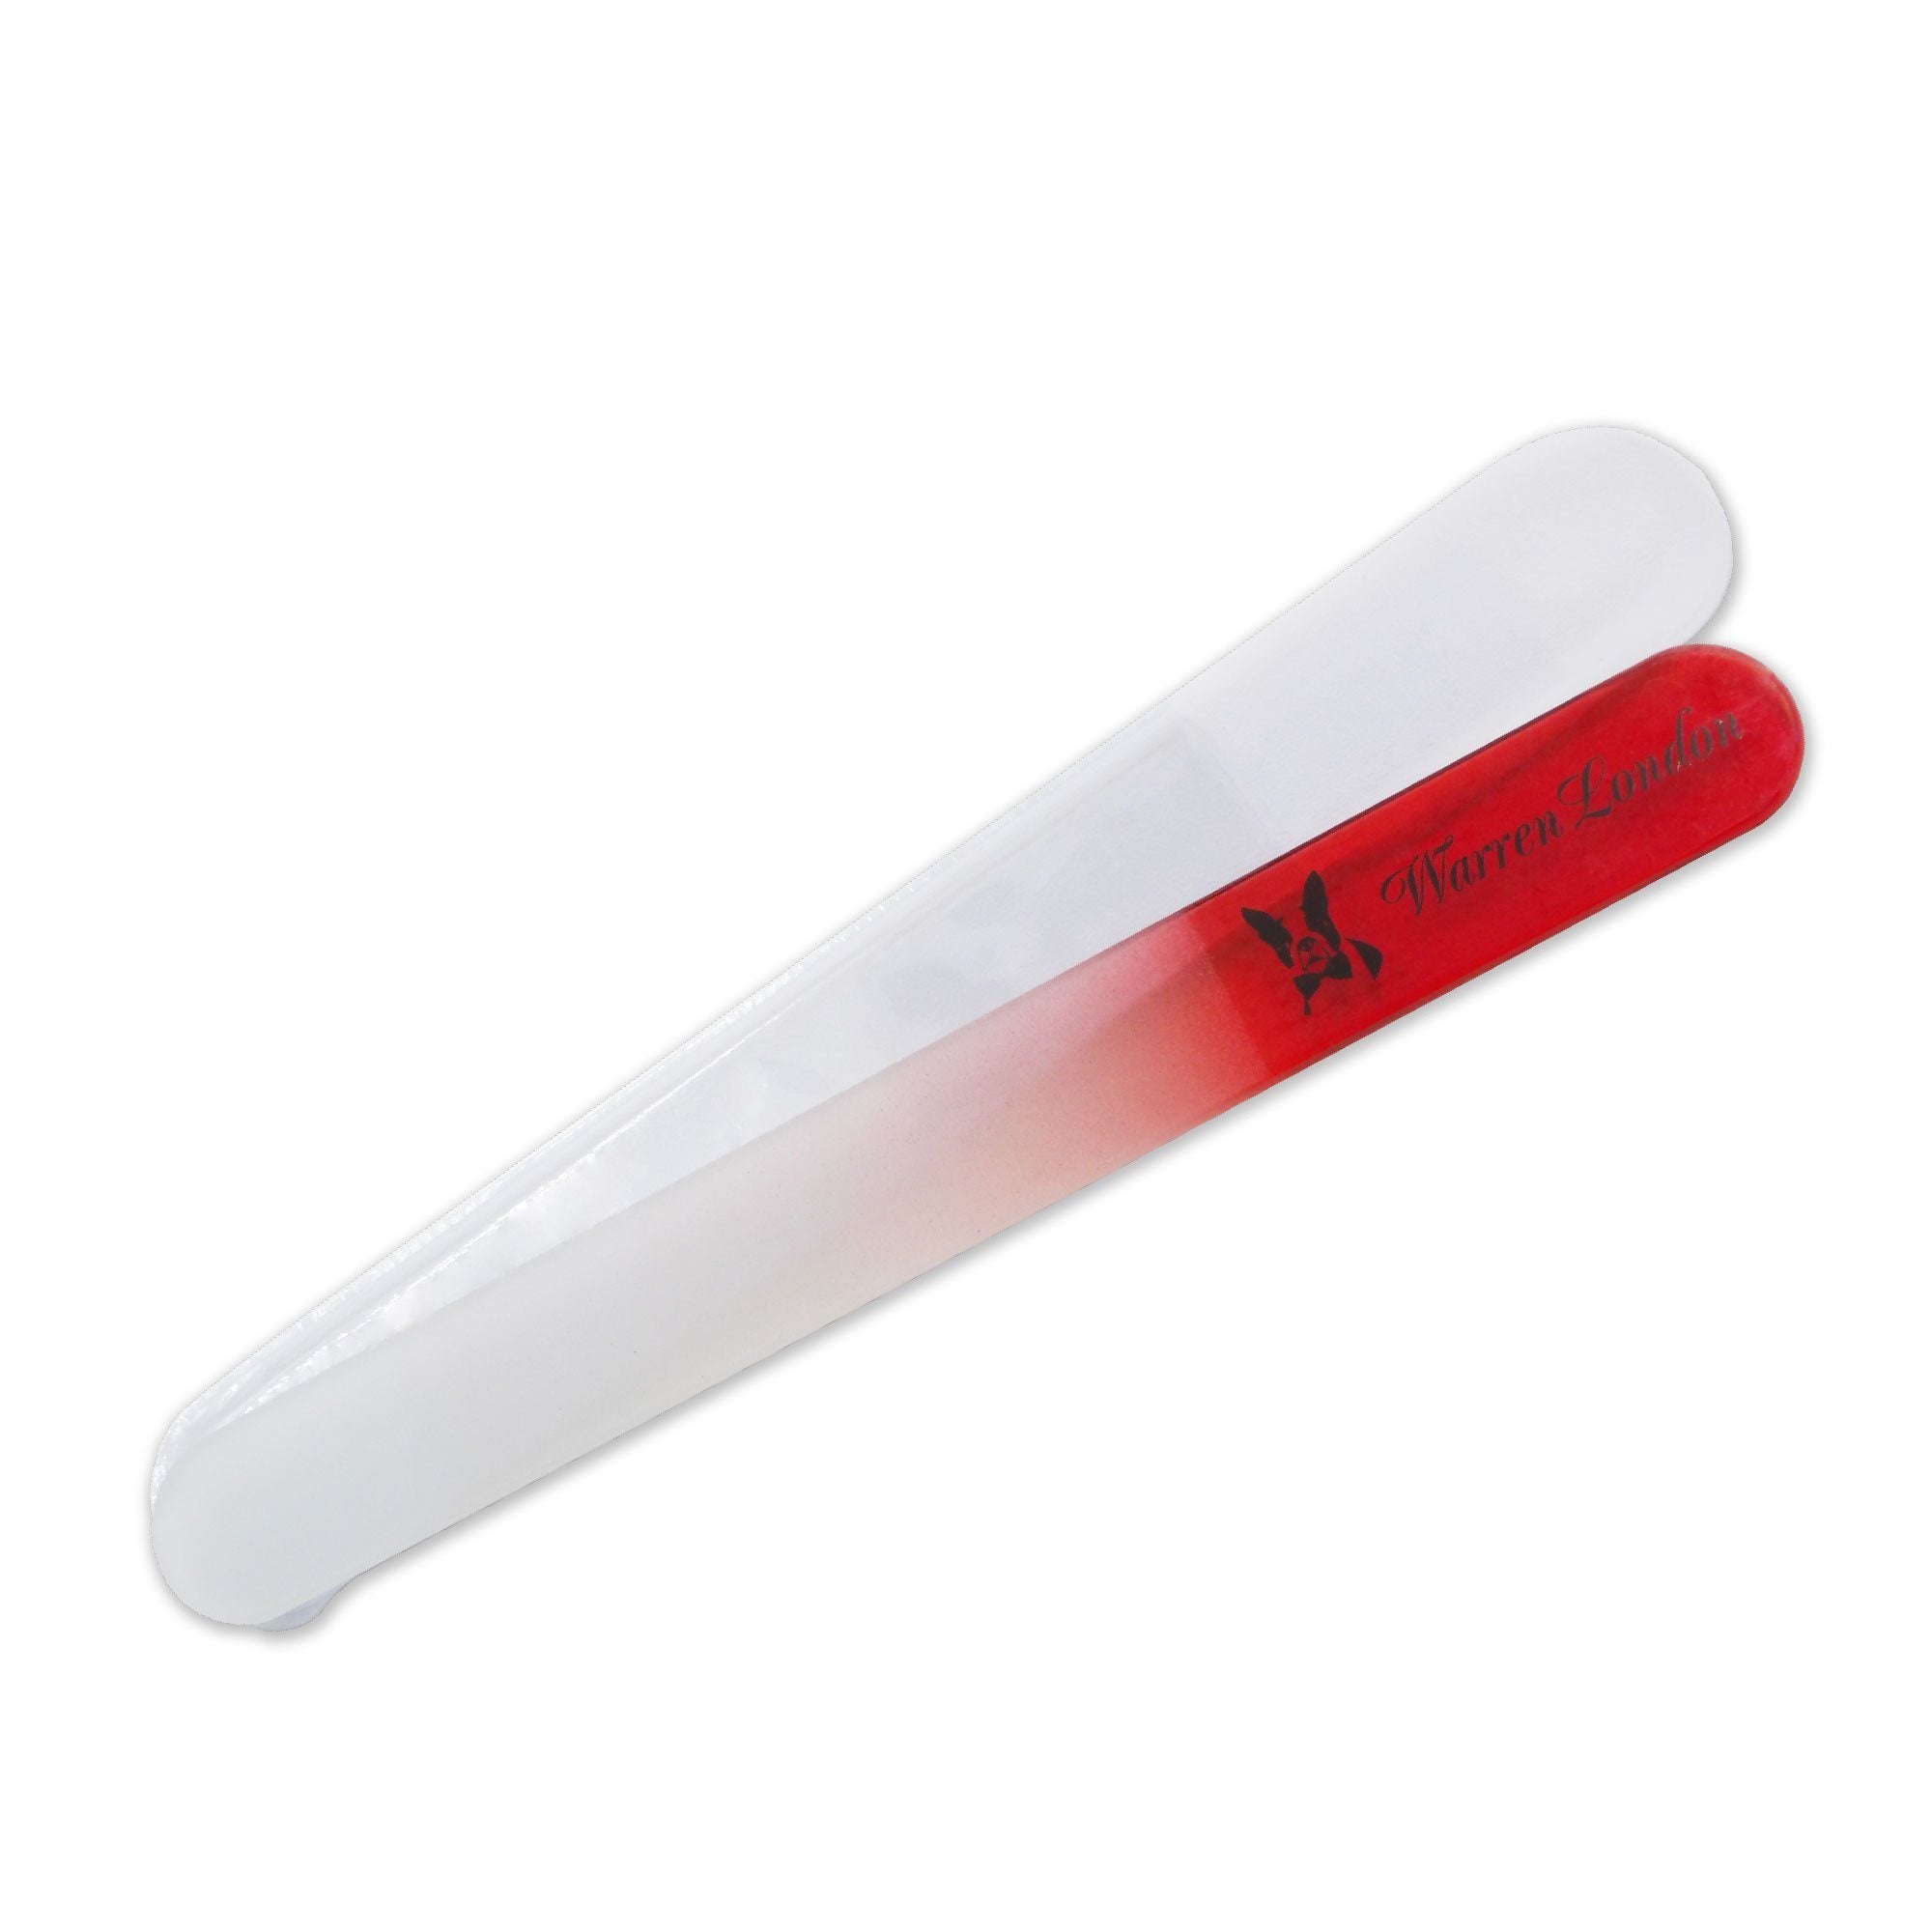 Glass Nail File for Dogs Spa Product Warren London 